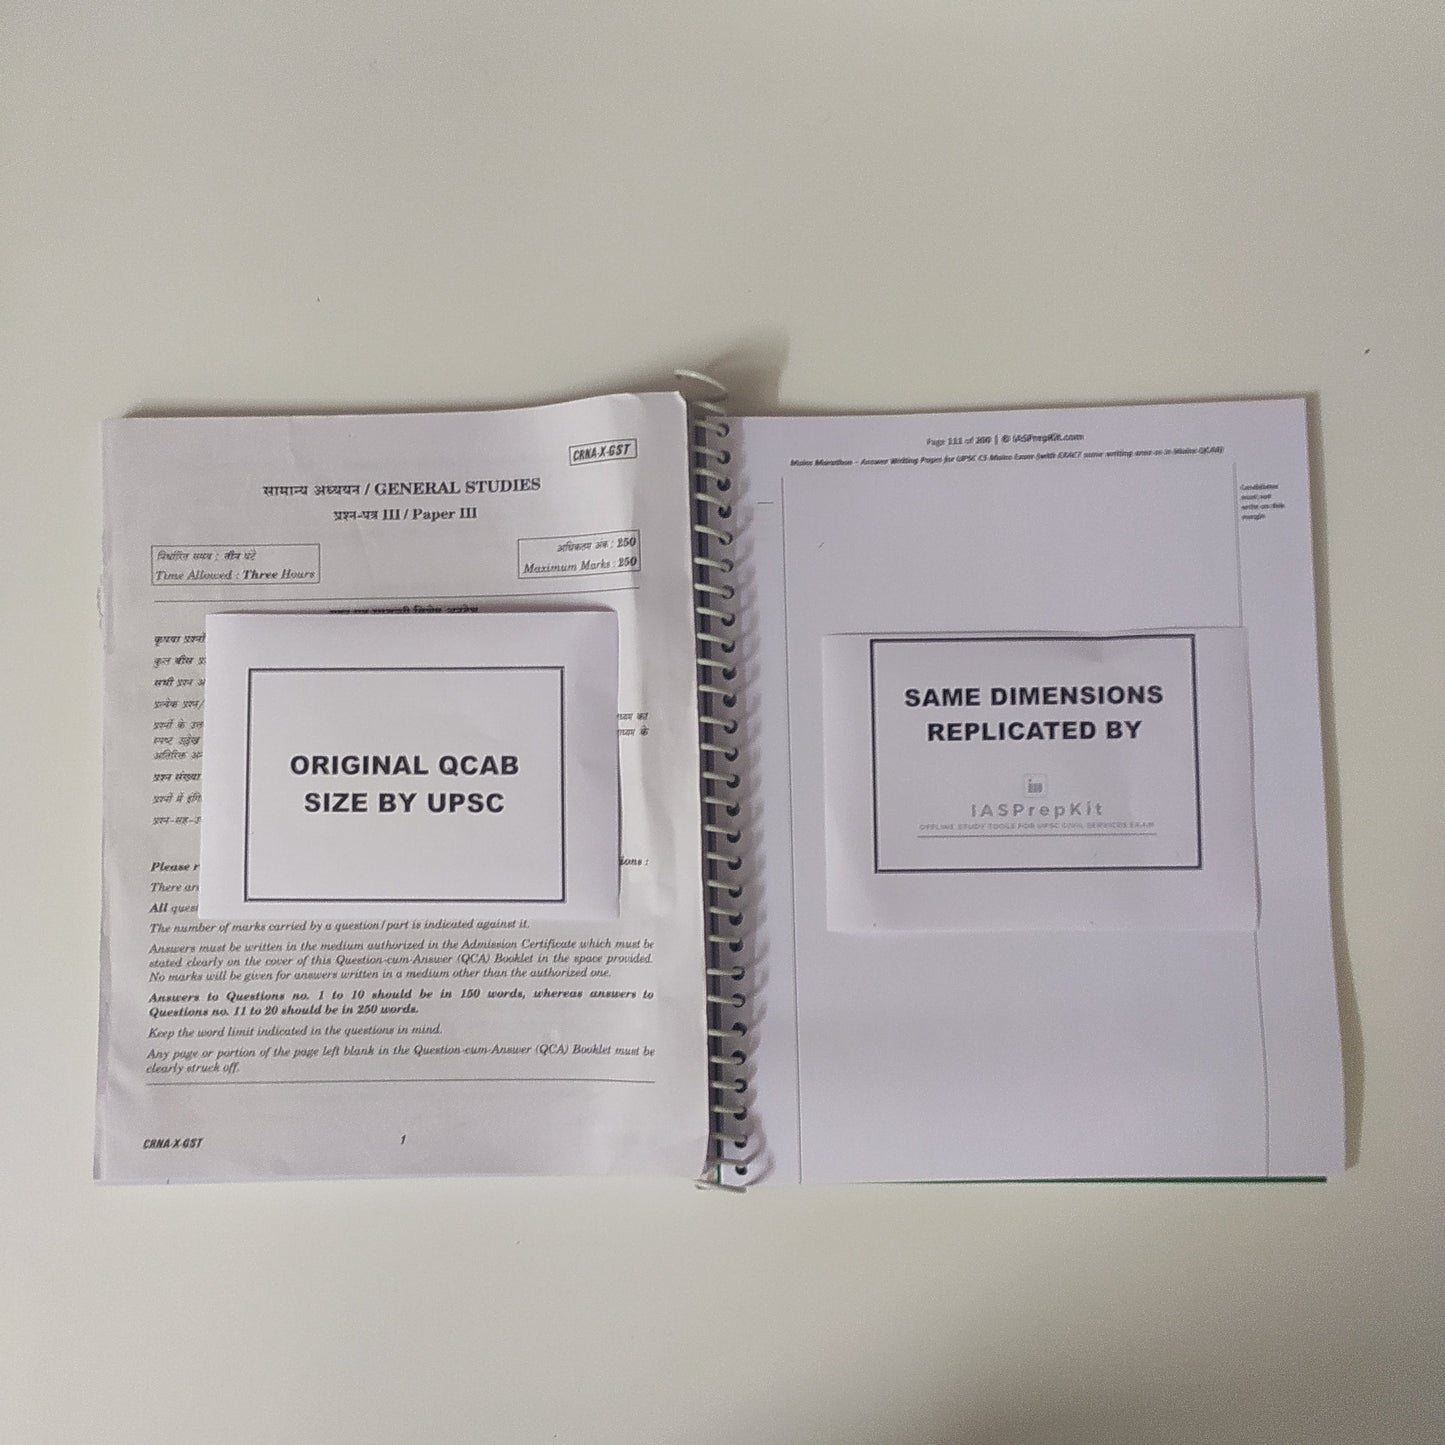 4 Booklets - Mains Marathon - Answer Writing Booklets for UPSC CS Mains Exam with exact same dimensions as in UPSC QCAB (200 pages in each booklet)